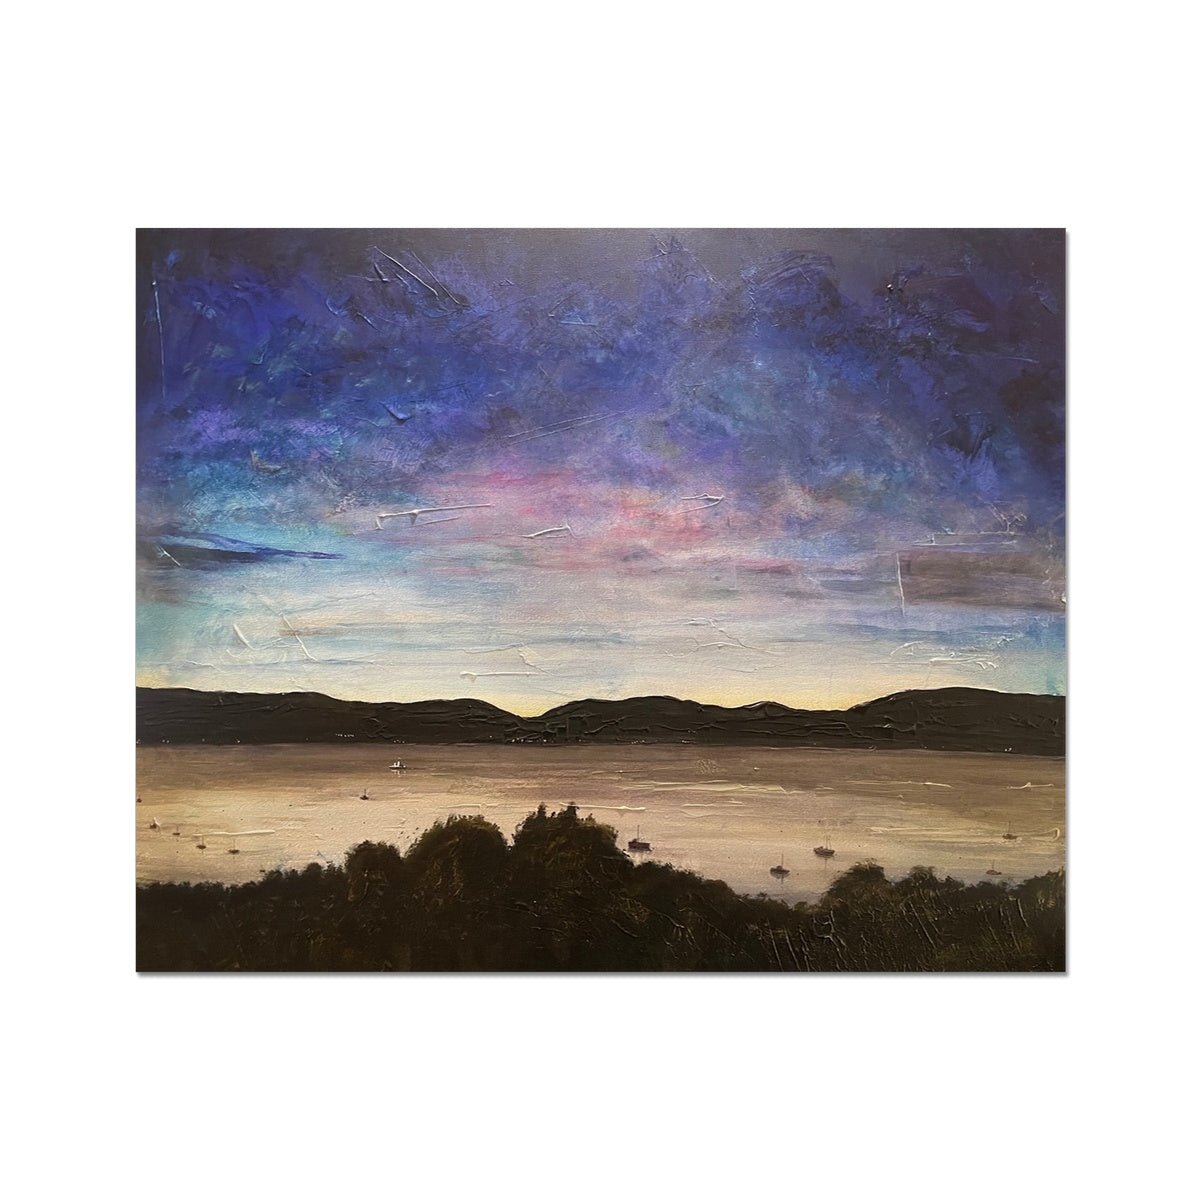 River Clyde Twilight Painting | Artist Proof Collector Prints From Scotland-Artist Proof Collector Prints-River Clyde Art Gallery-20"x16"-Paintings, Prints, Homeware, Art Gifts From Scotland By Scottish Artist Kevin Hunter